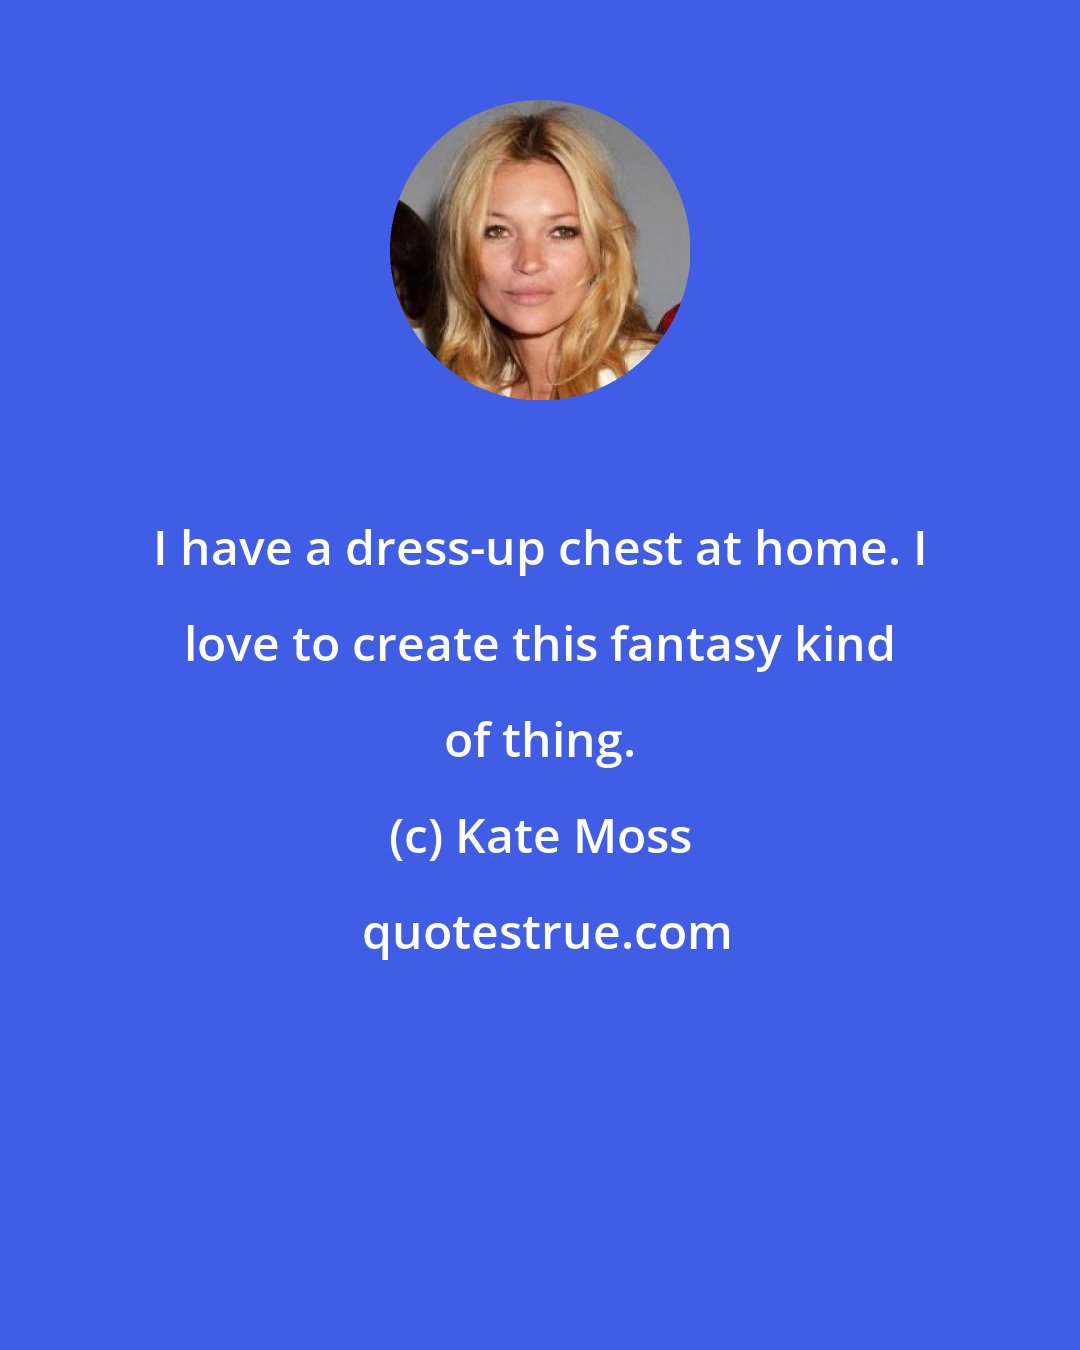 Kate Moss: I have a dress-up chest at home. I love to create this fantasy kind of thing.